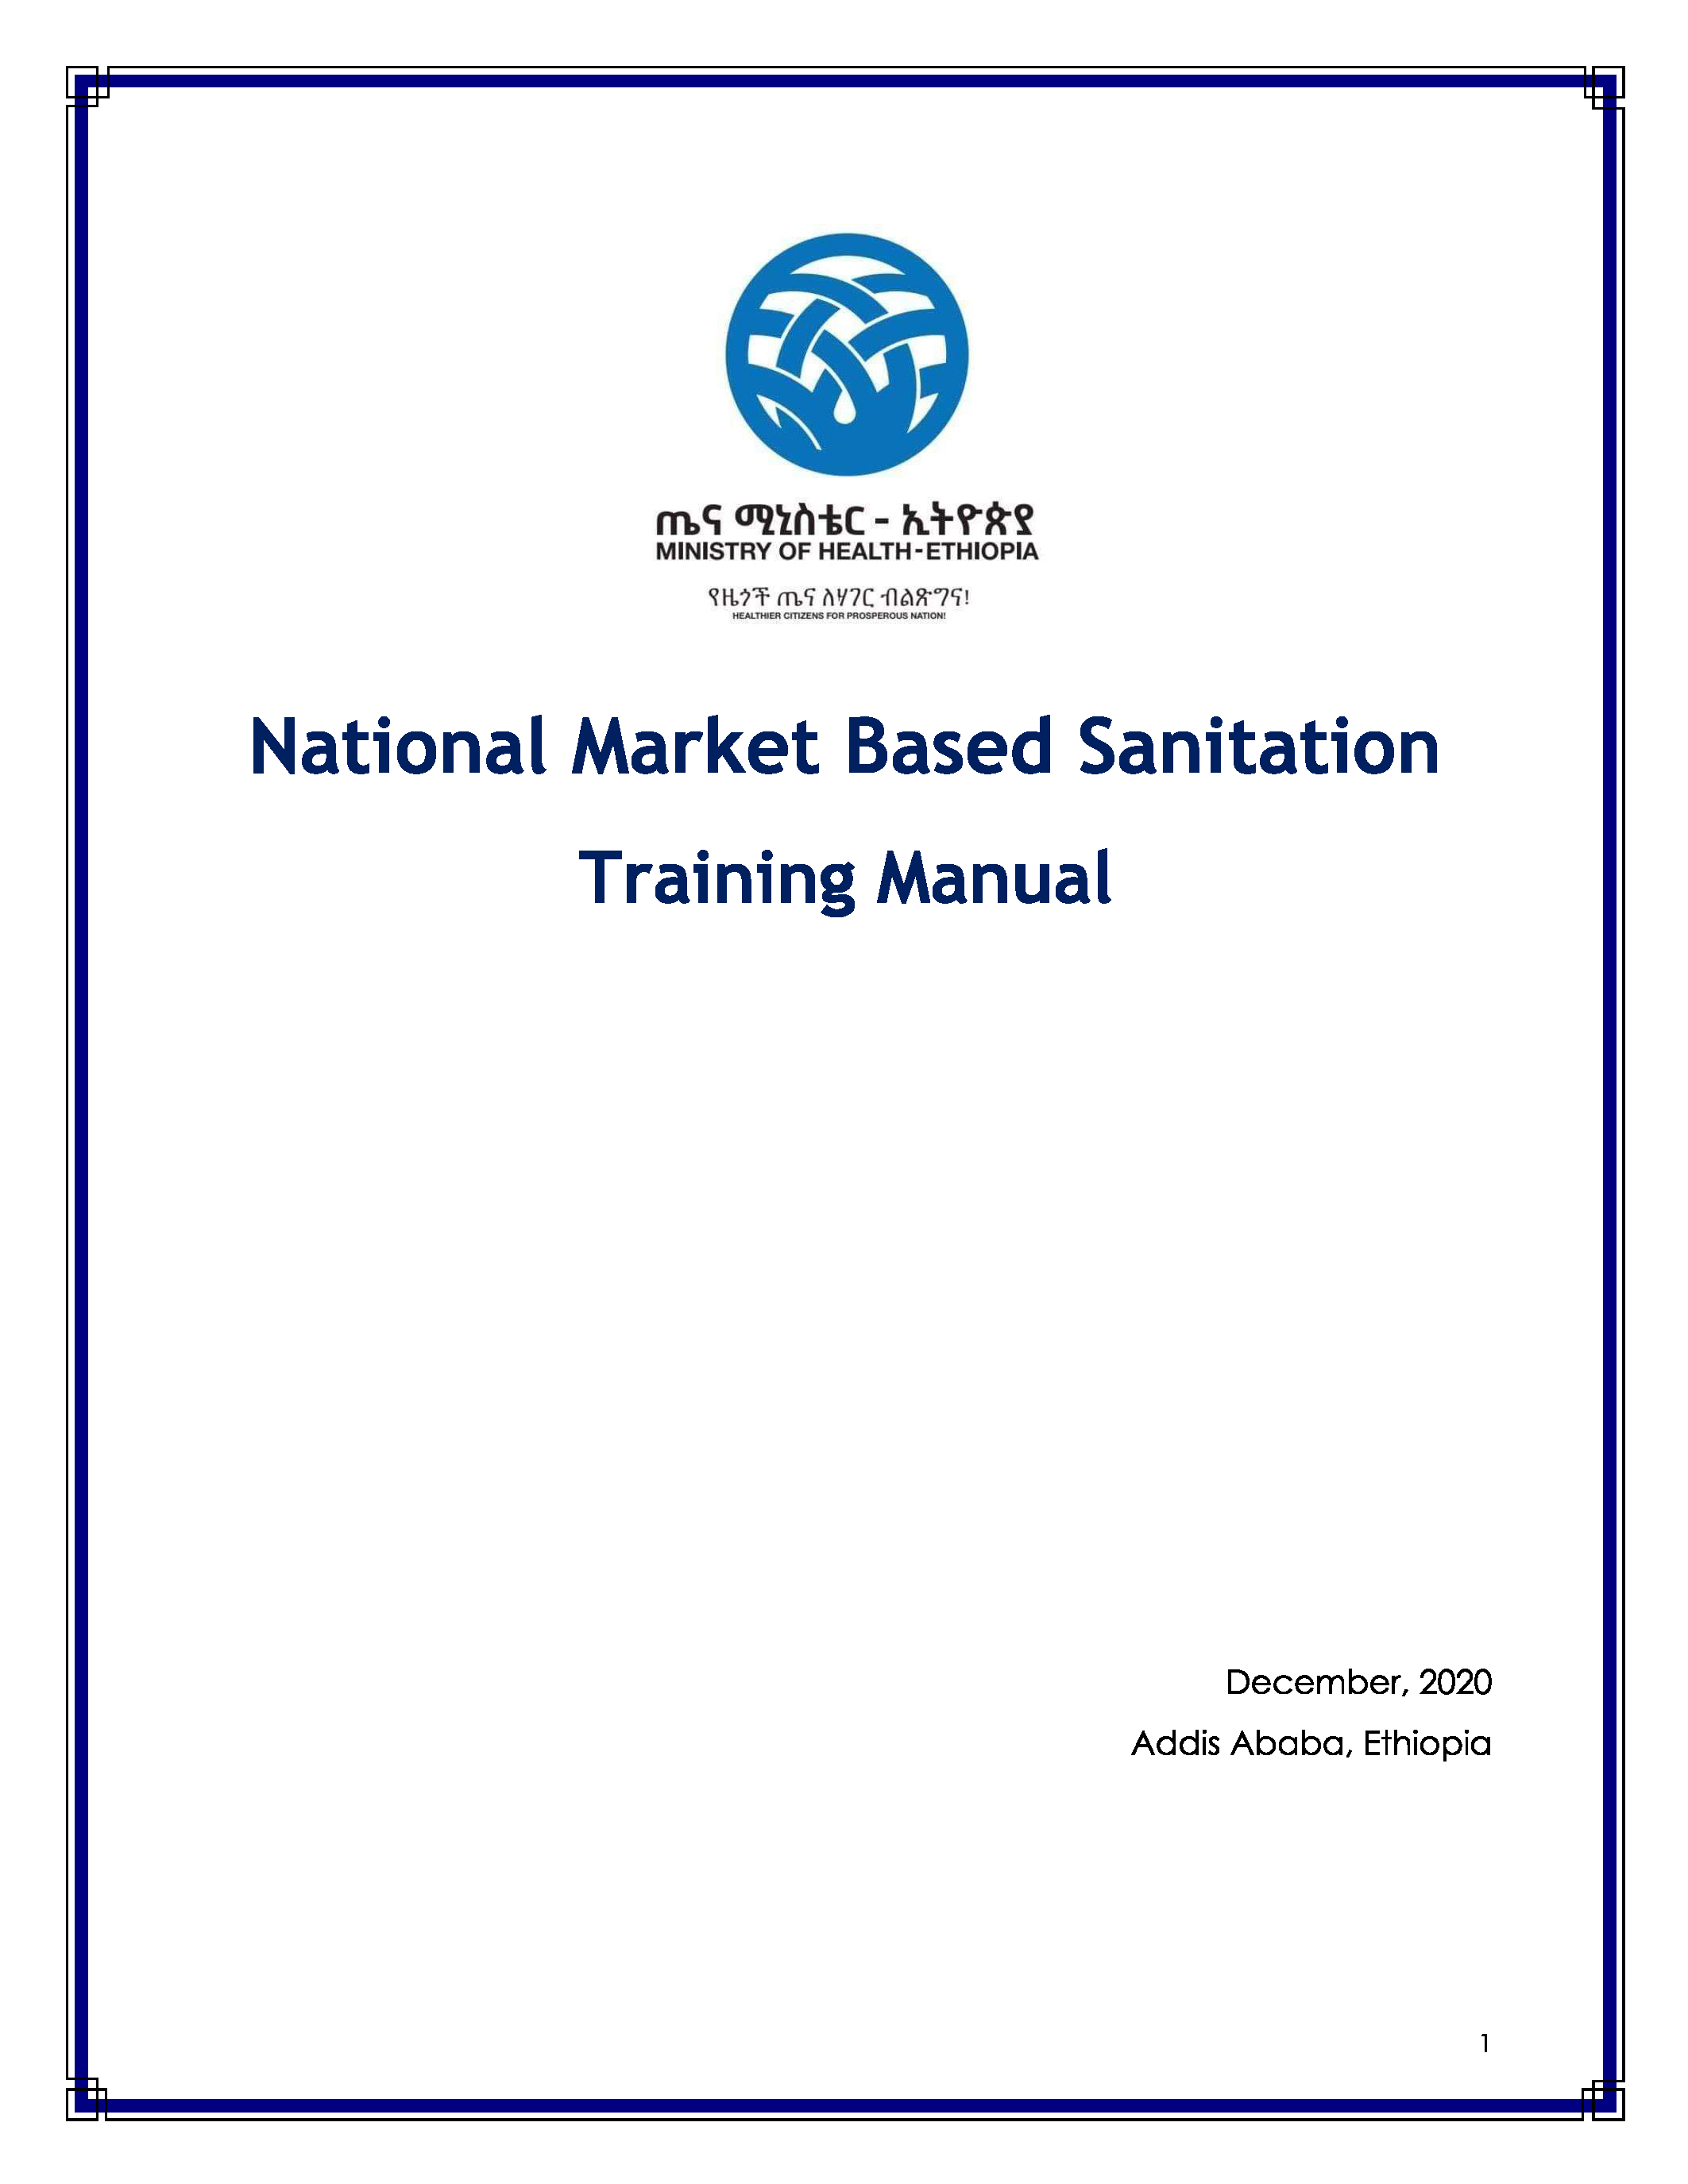 Cover Page of Training Manual. White page with a blue border. 